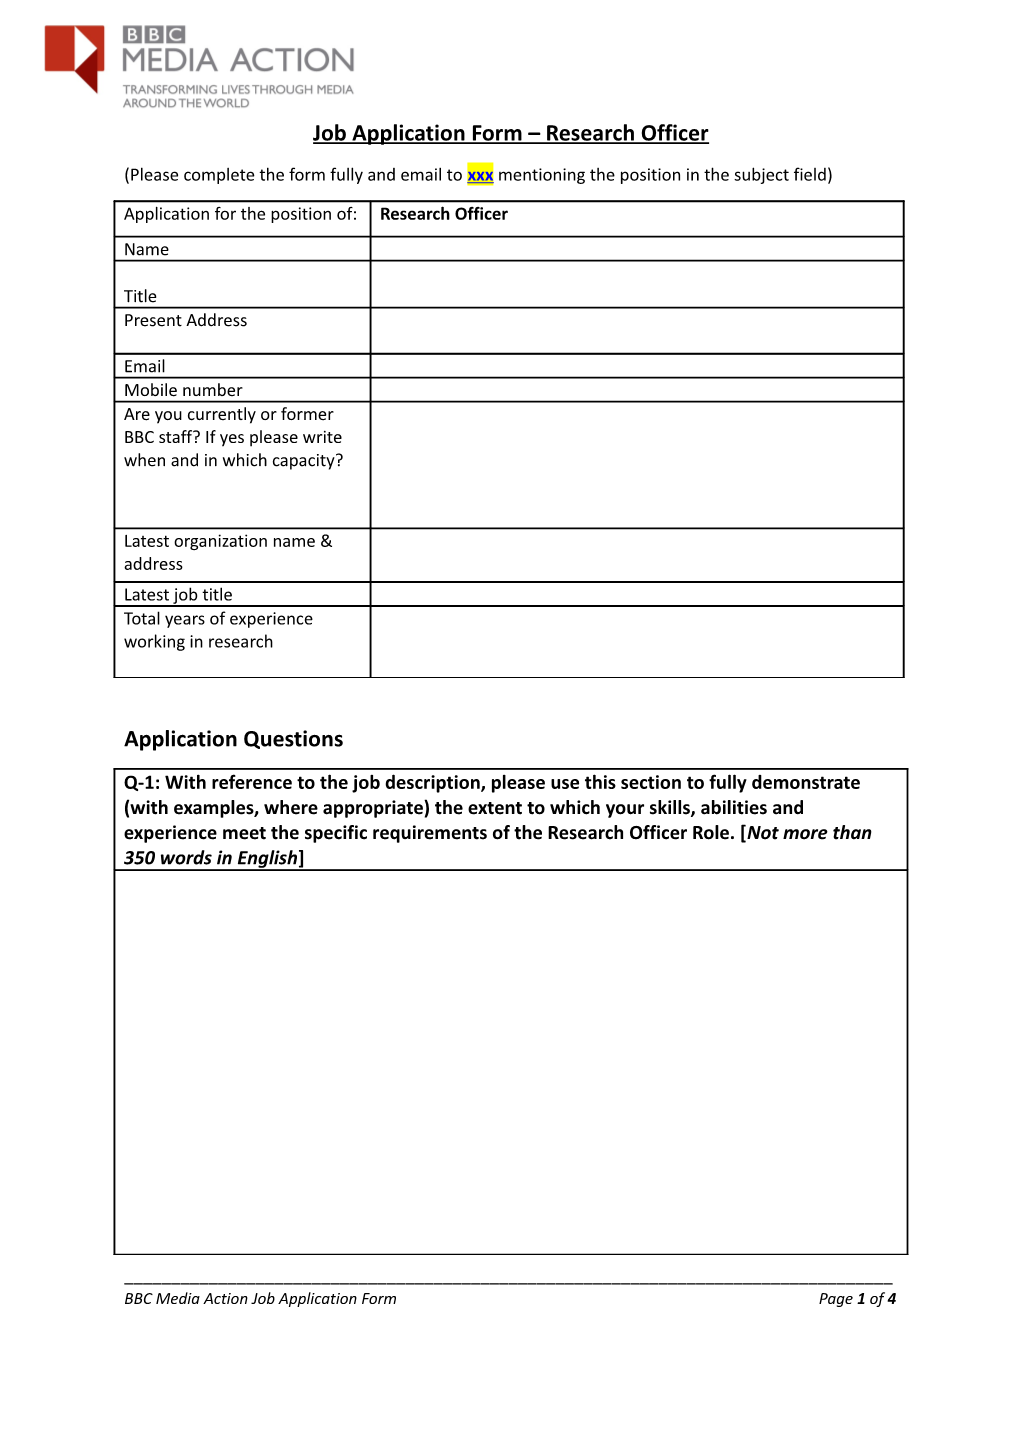 Job Application Form Research Officer